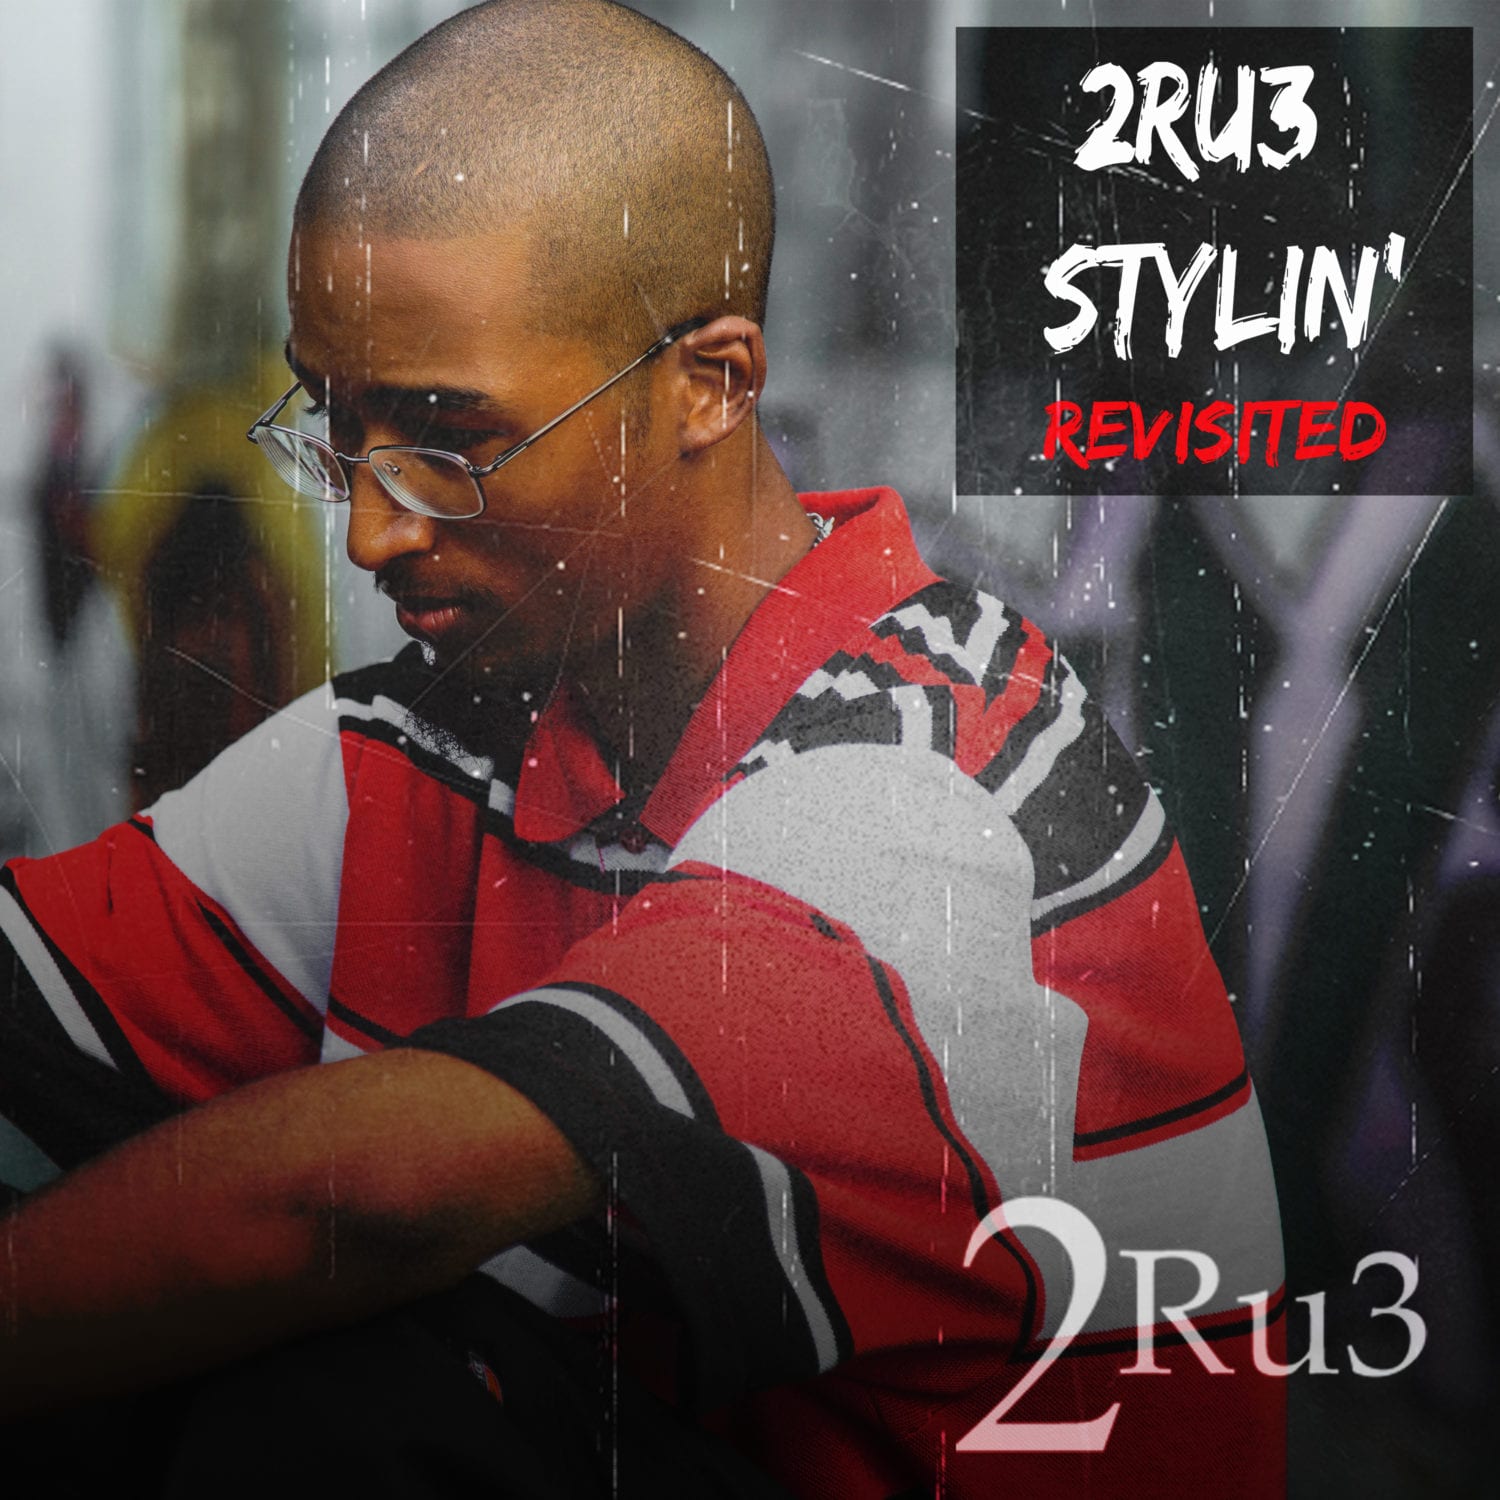 We Review 2RU3's Latest Mixtape - 2Ru3 Stylin' (Revisited)